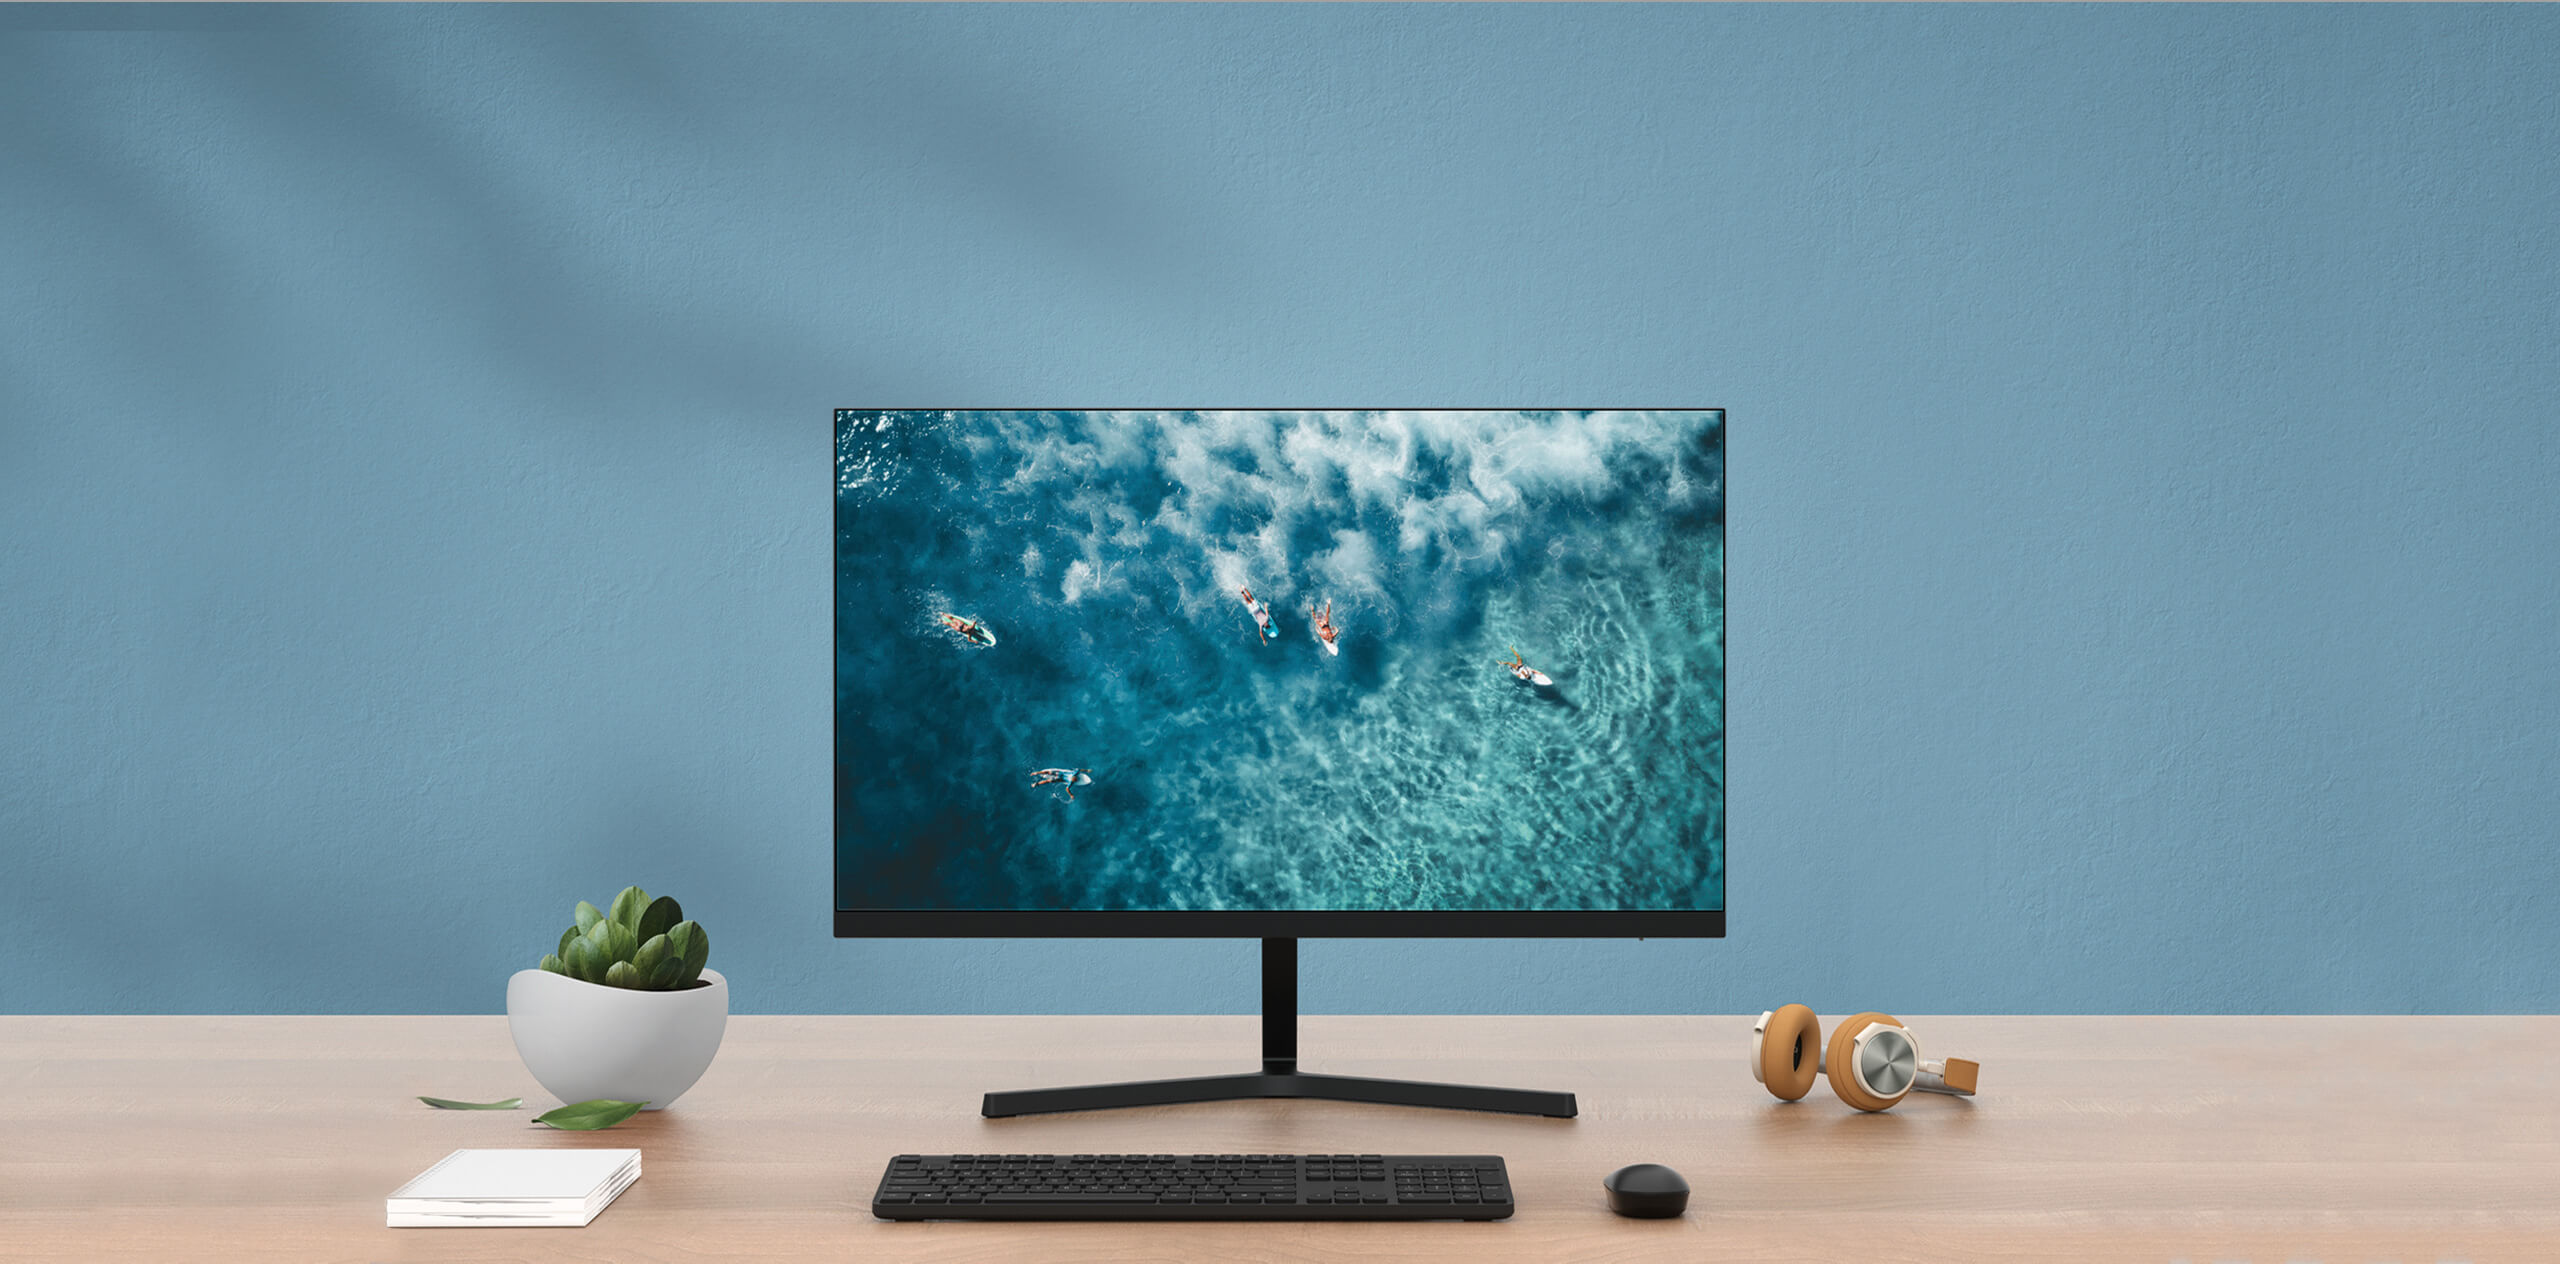 AliExpress started selling Redmi Display 1A: a thin monitor with a 23.8-inch IPS screen for $145